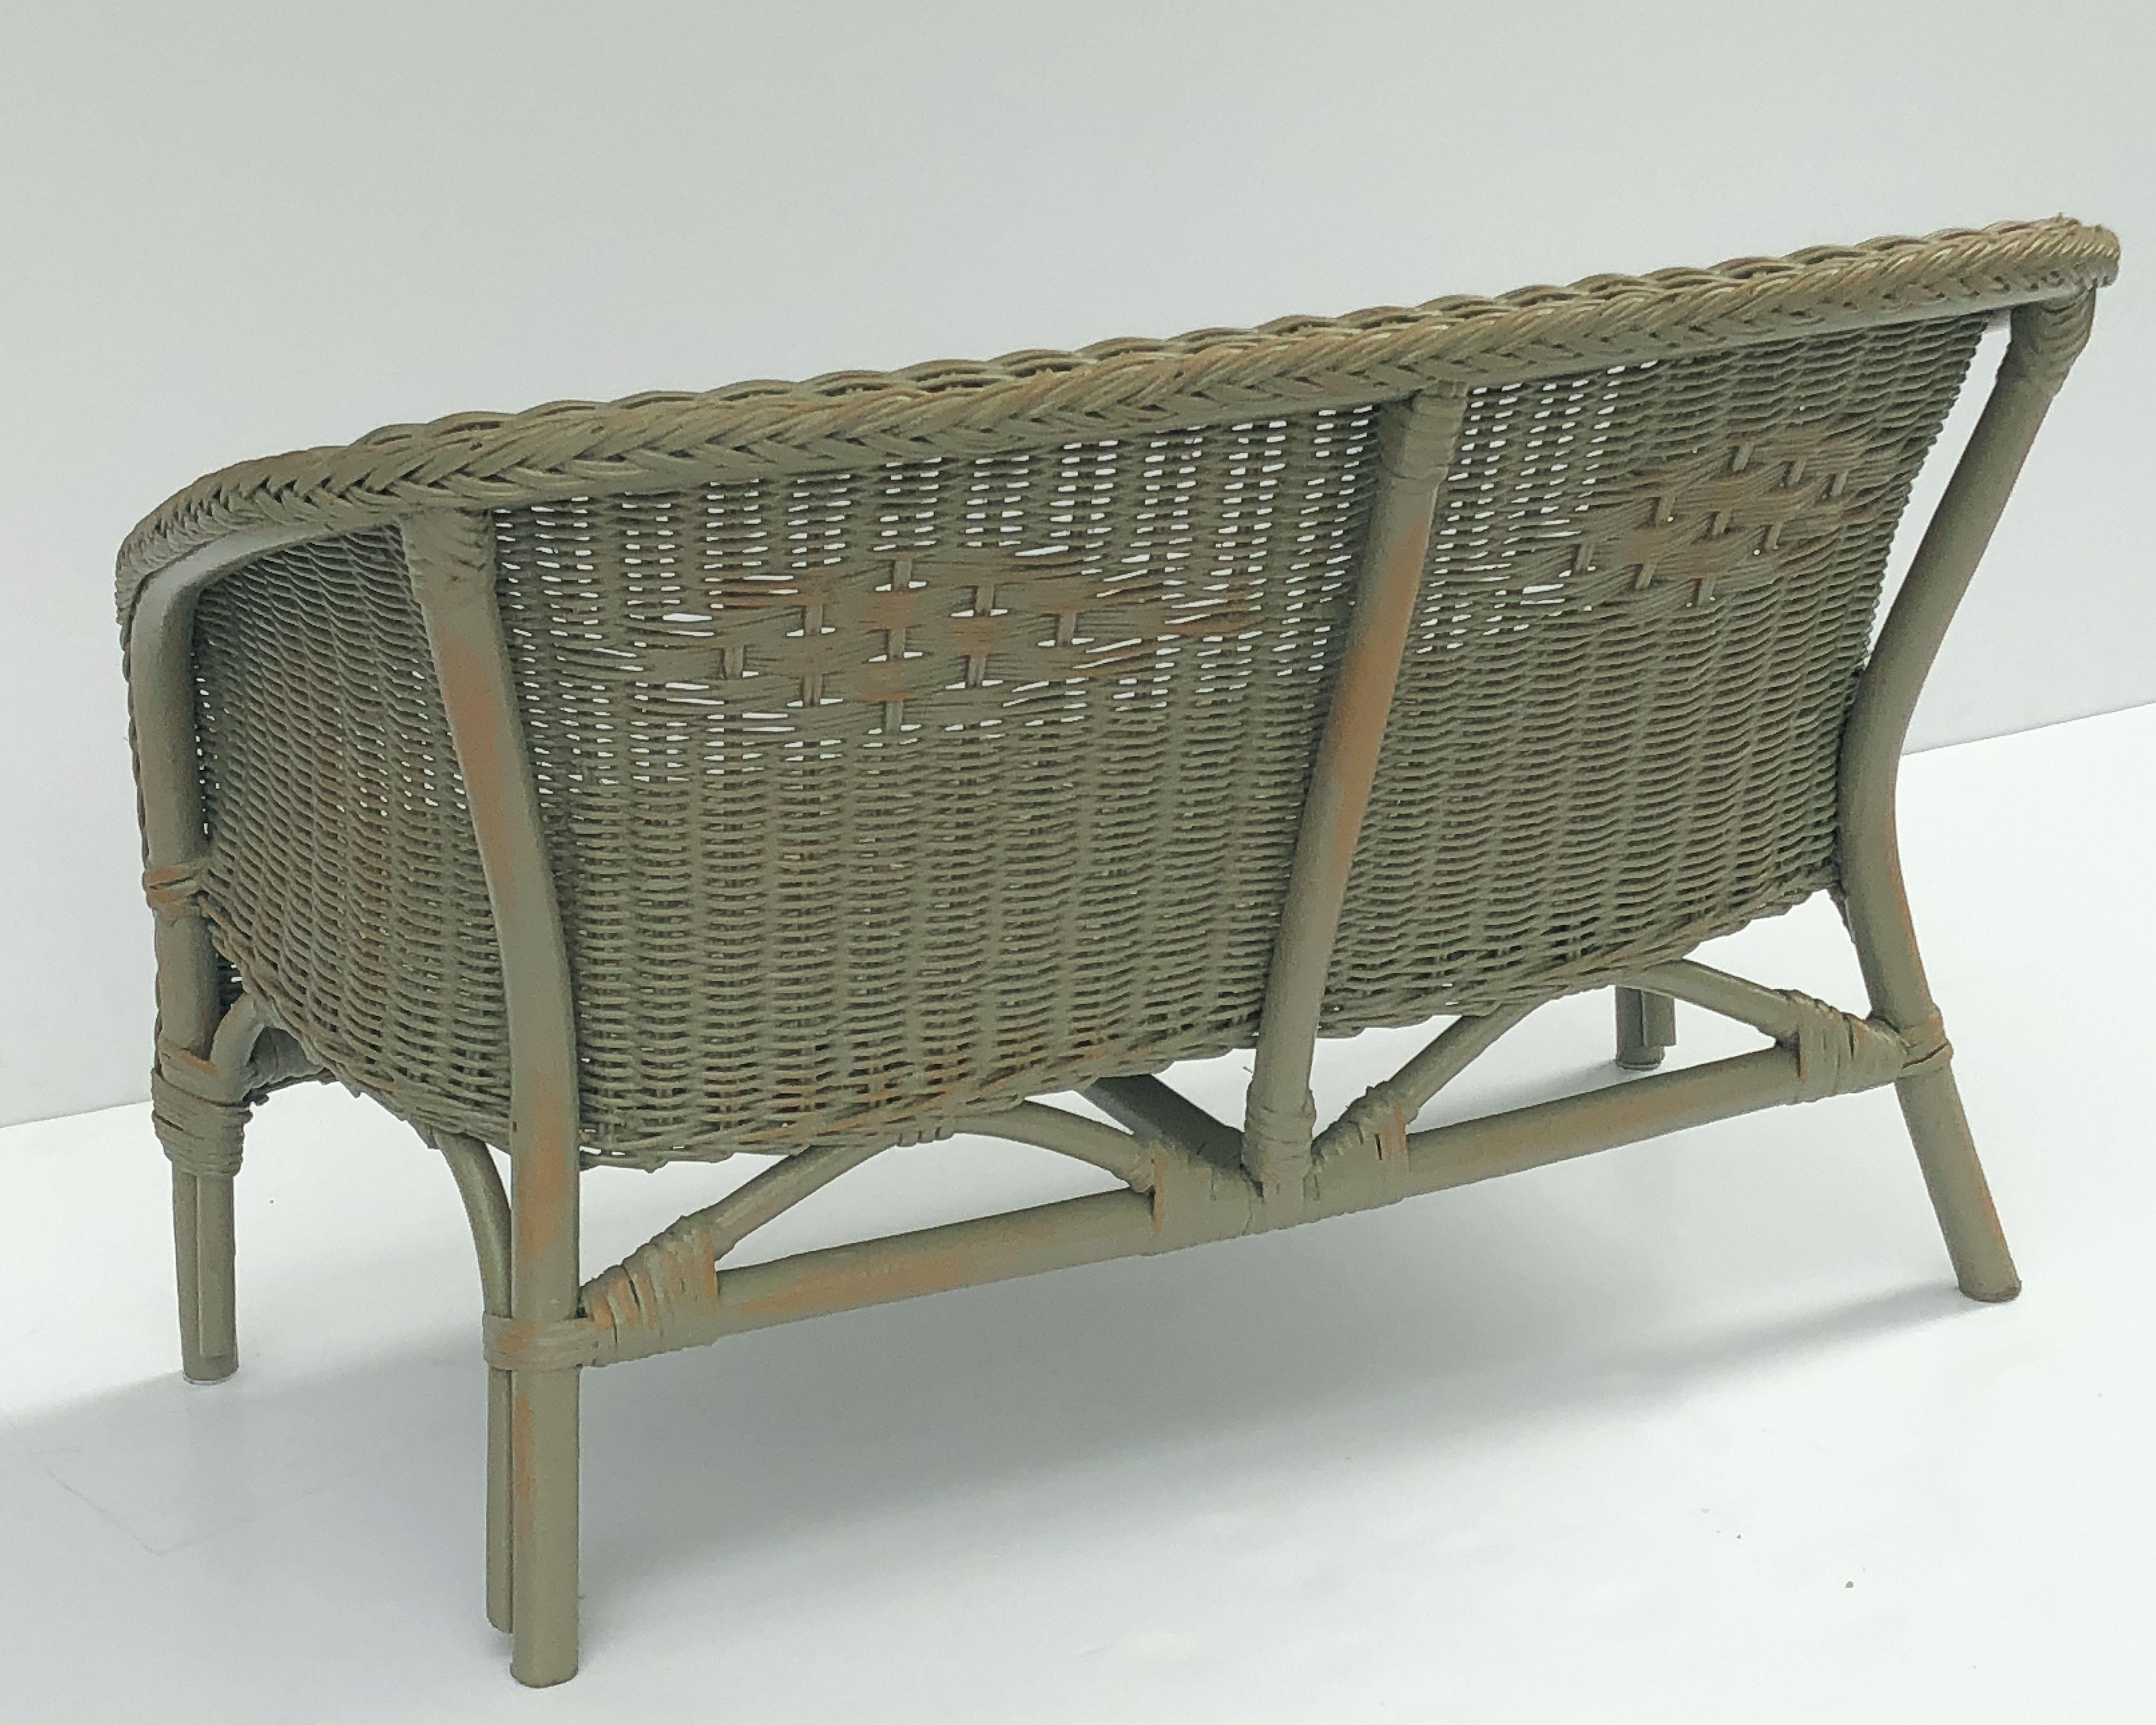 English Wicker Garden Child's Settee Bench or Seat by Lloyd Loom 2